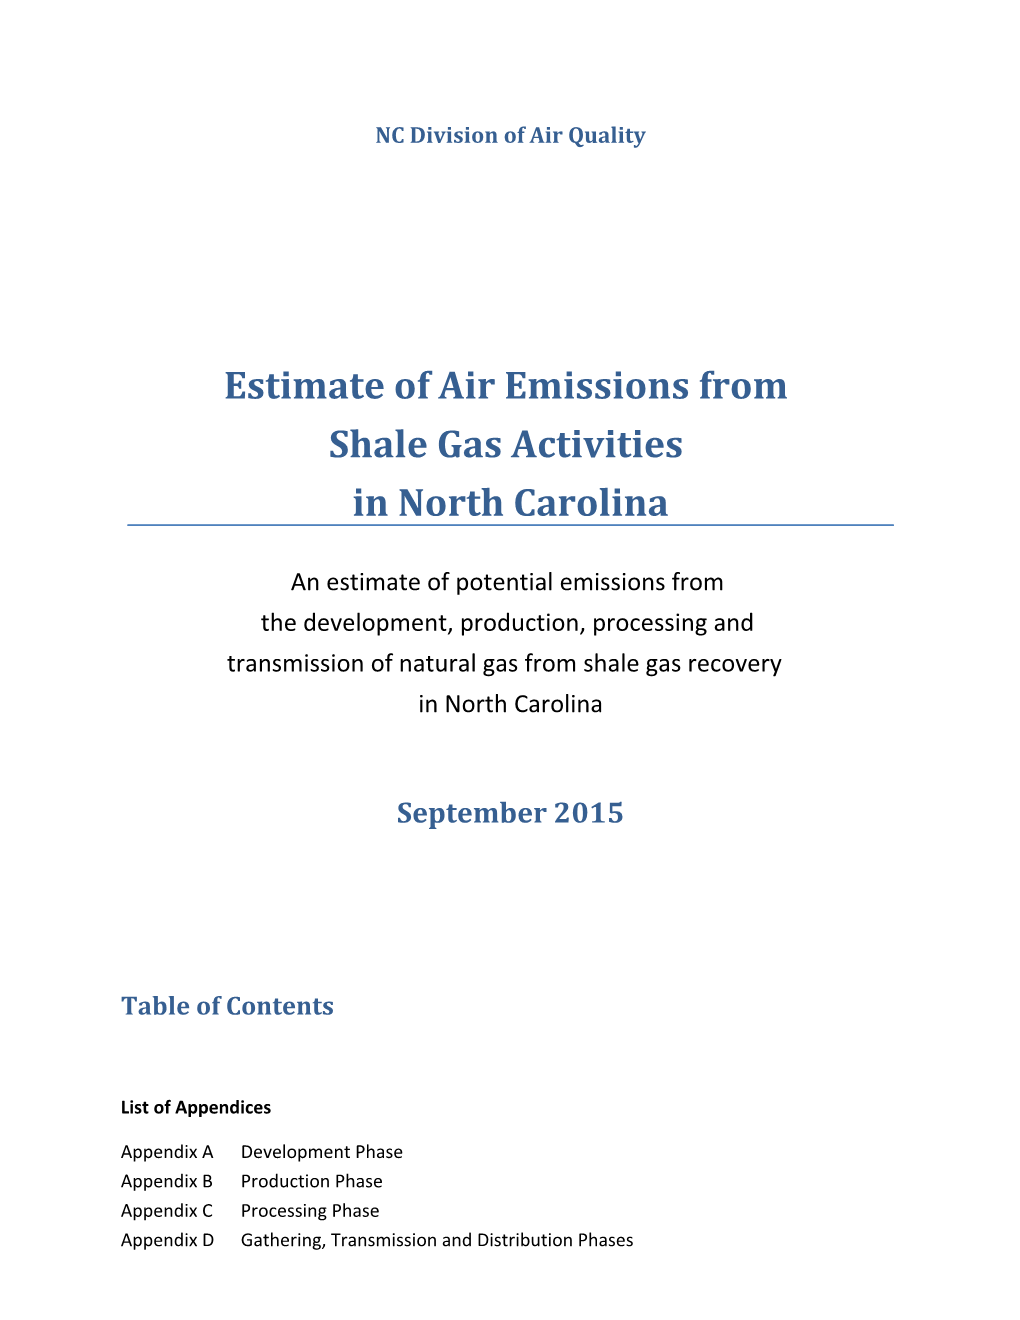 Air Emissions Profile from Shale Gas Development and Production in North Carolina